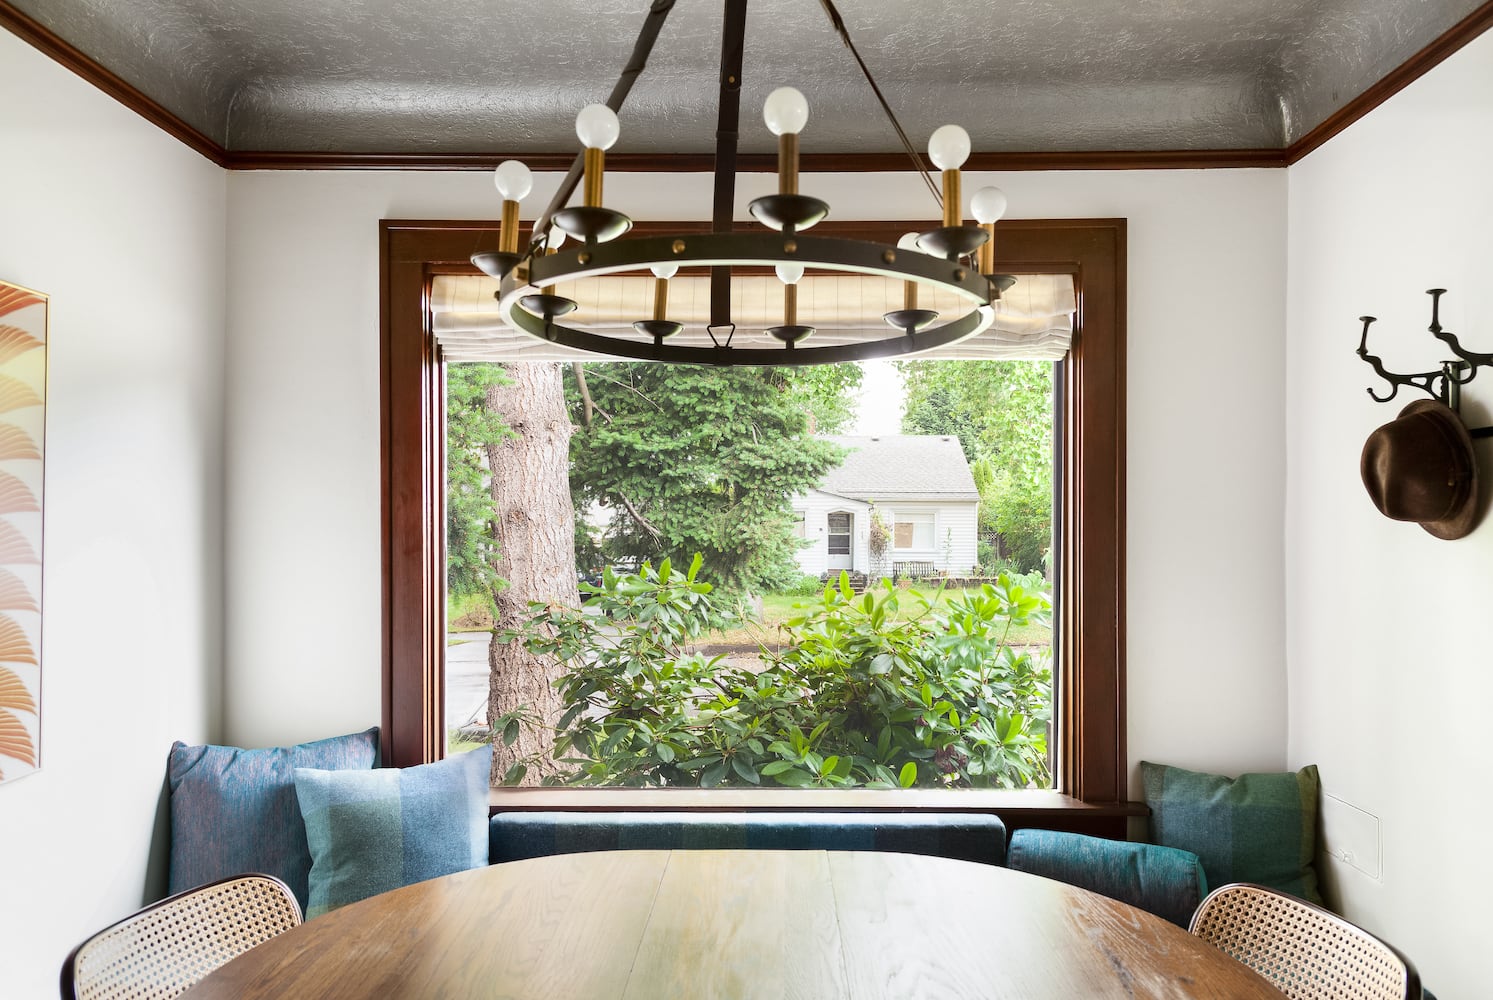 Dining area with modern chandelier, hat rack, built-in bench, large window